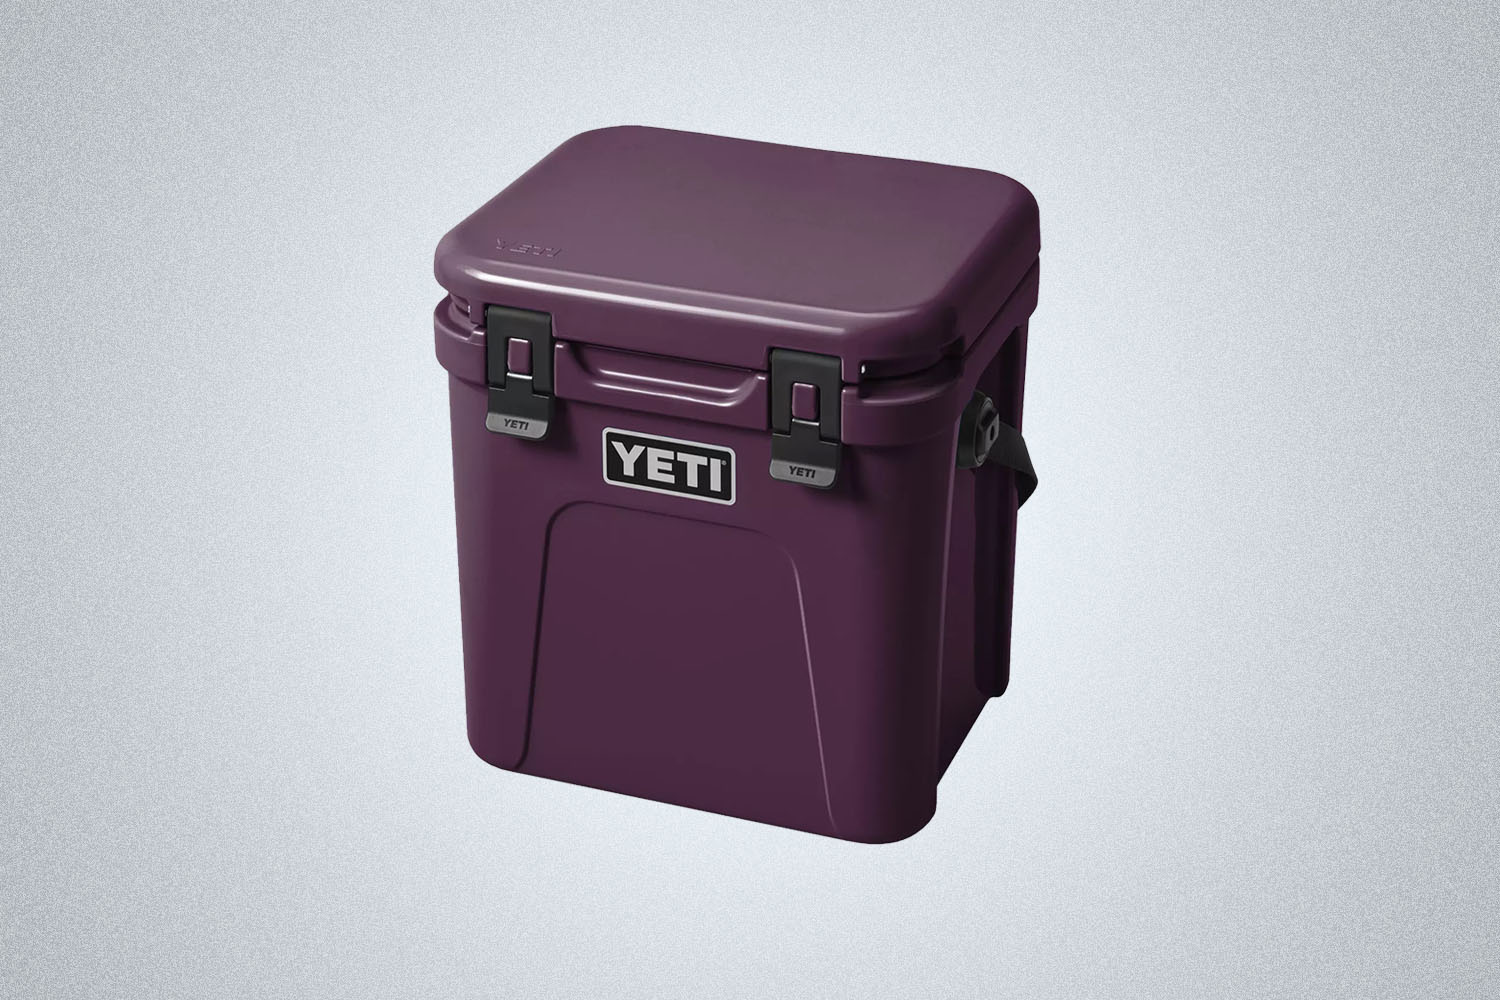 Prime Day Deal: YETI Tundra 45 Cooler